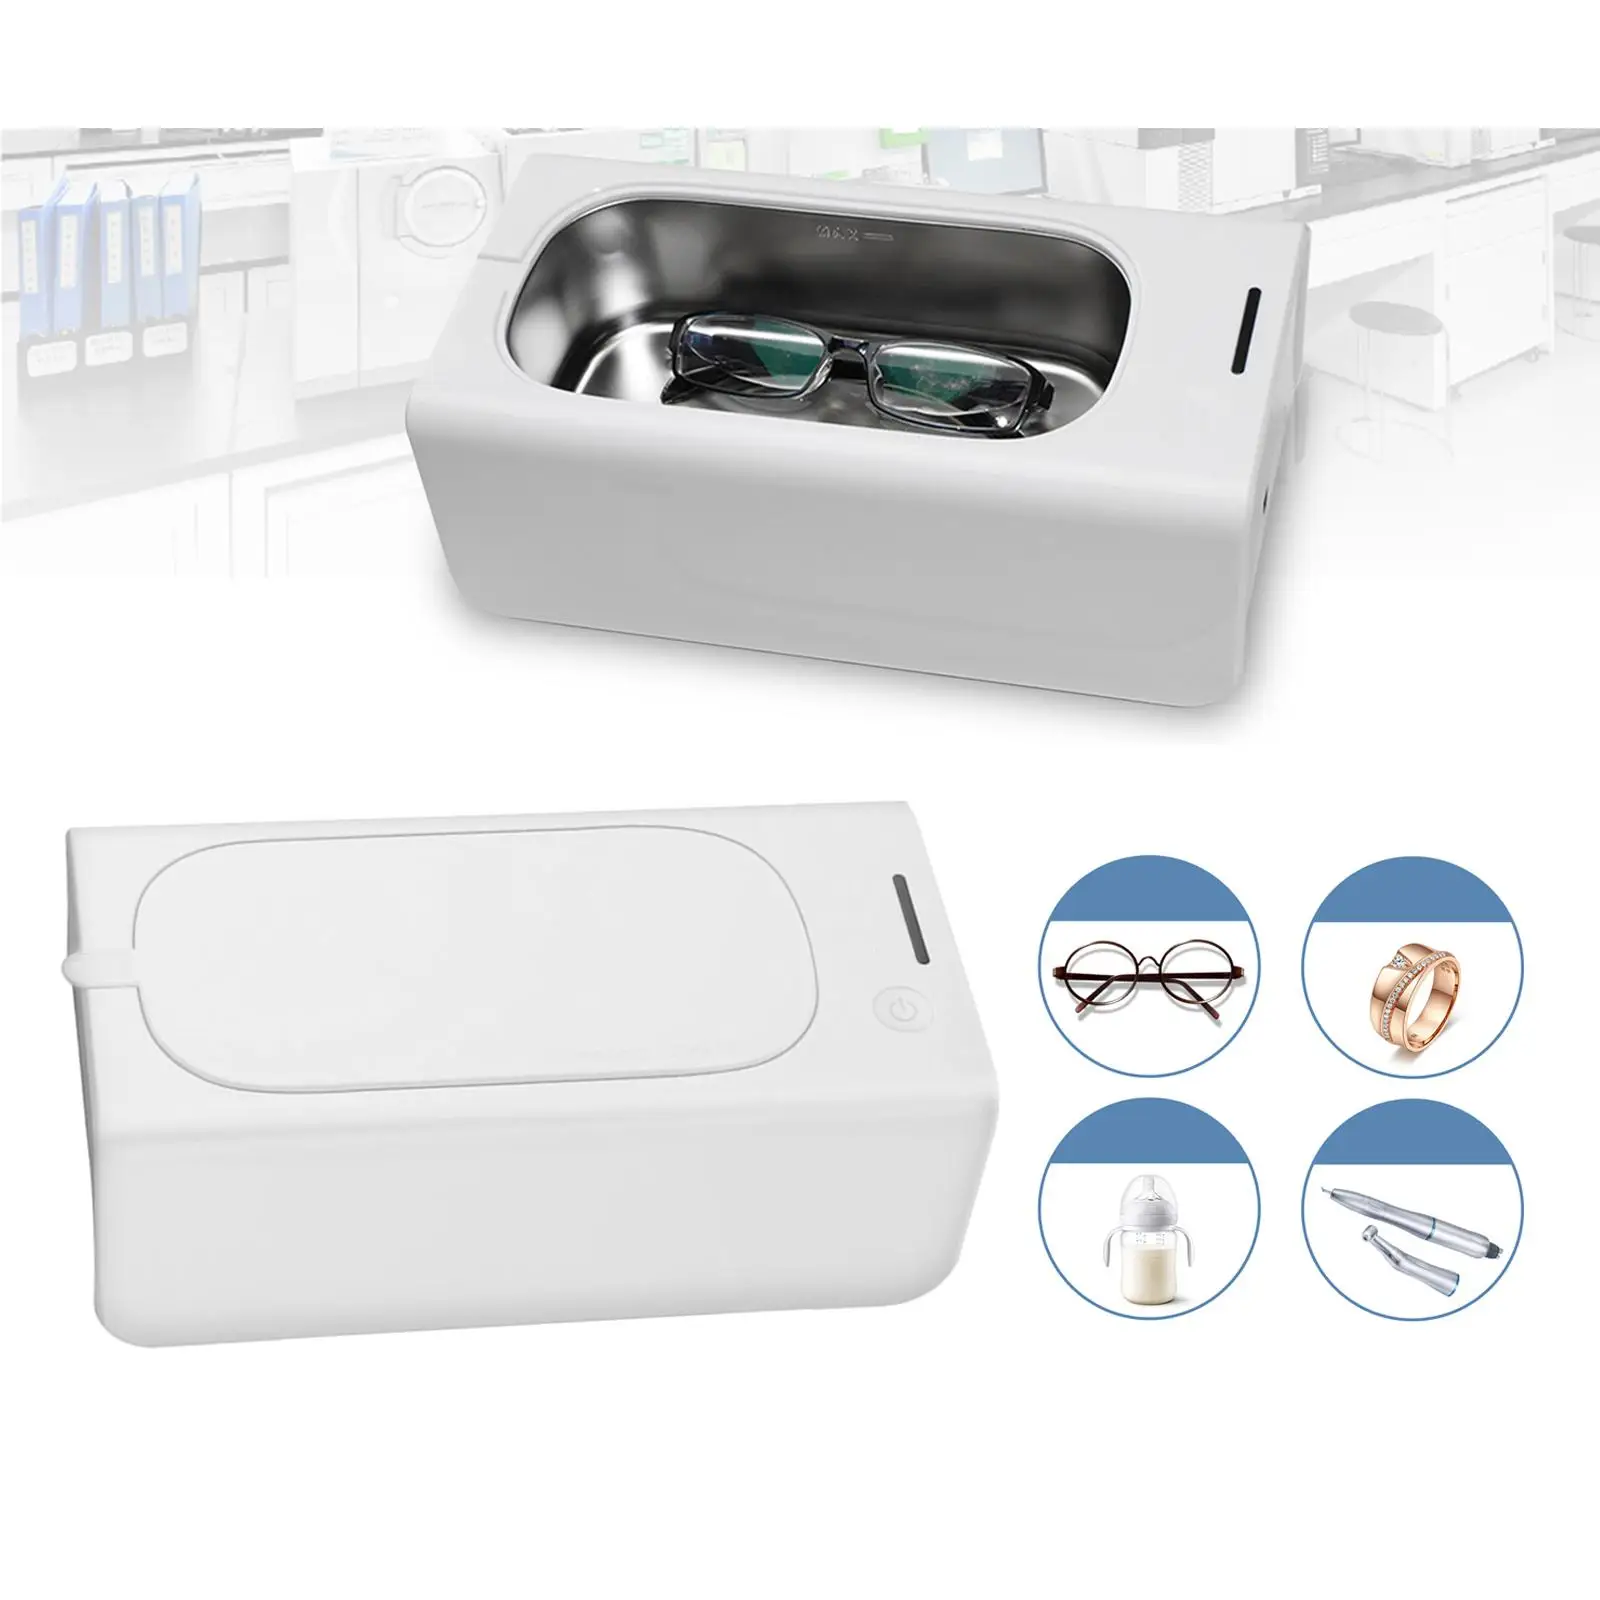 Household Professional Mini Size Digital Ultrasonic Cleaner Jewelry Watches Glasses Circuit Board Cleaning Sterilizing Tool